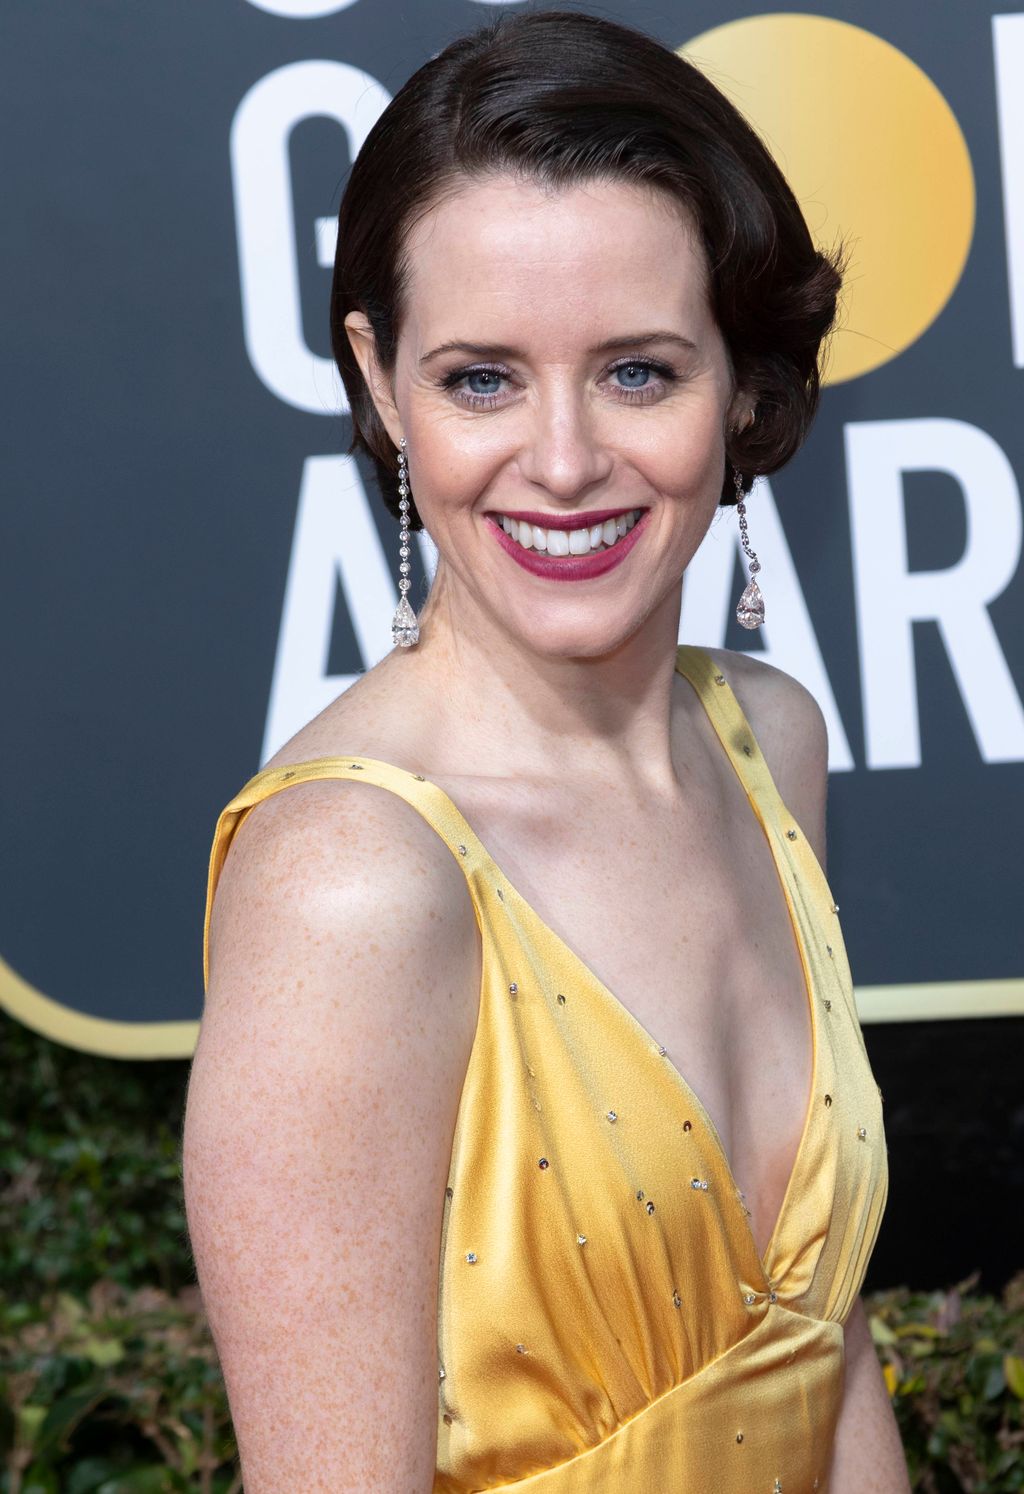 Golden Globe Awards 2019 Celebrities Claire Foy Golden Globes 2019 film; awards; red carpet; fashio Arts Culture and Entertainment globes76 goldenglobe goldenglobes GLOBE 